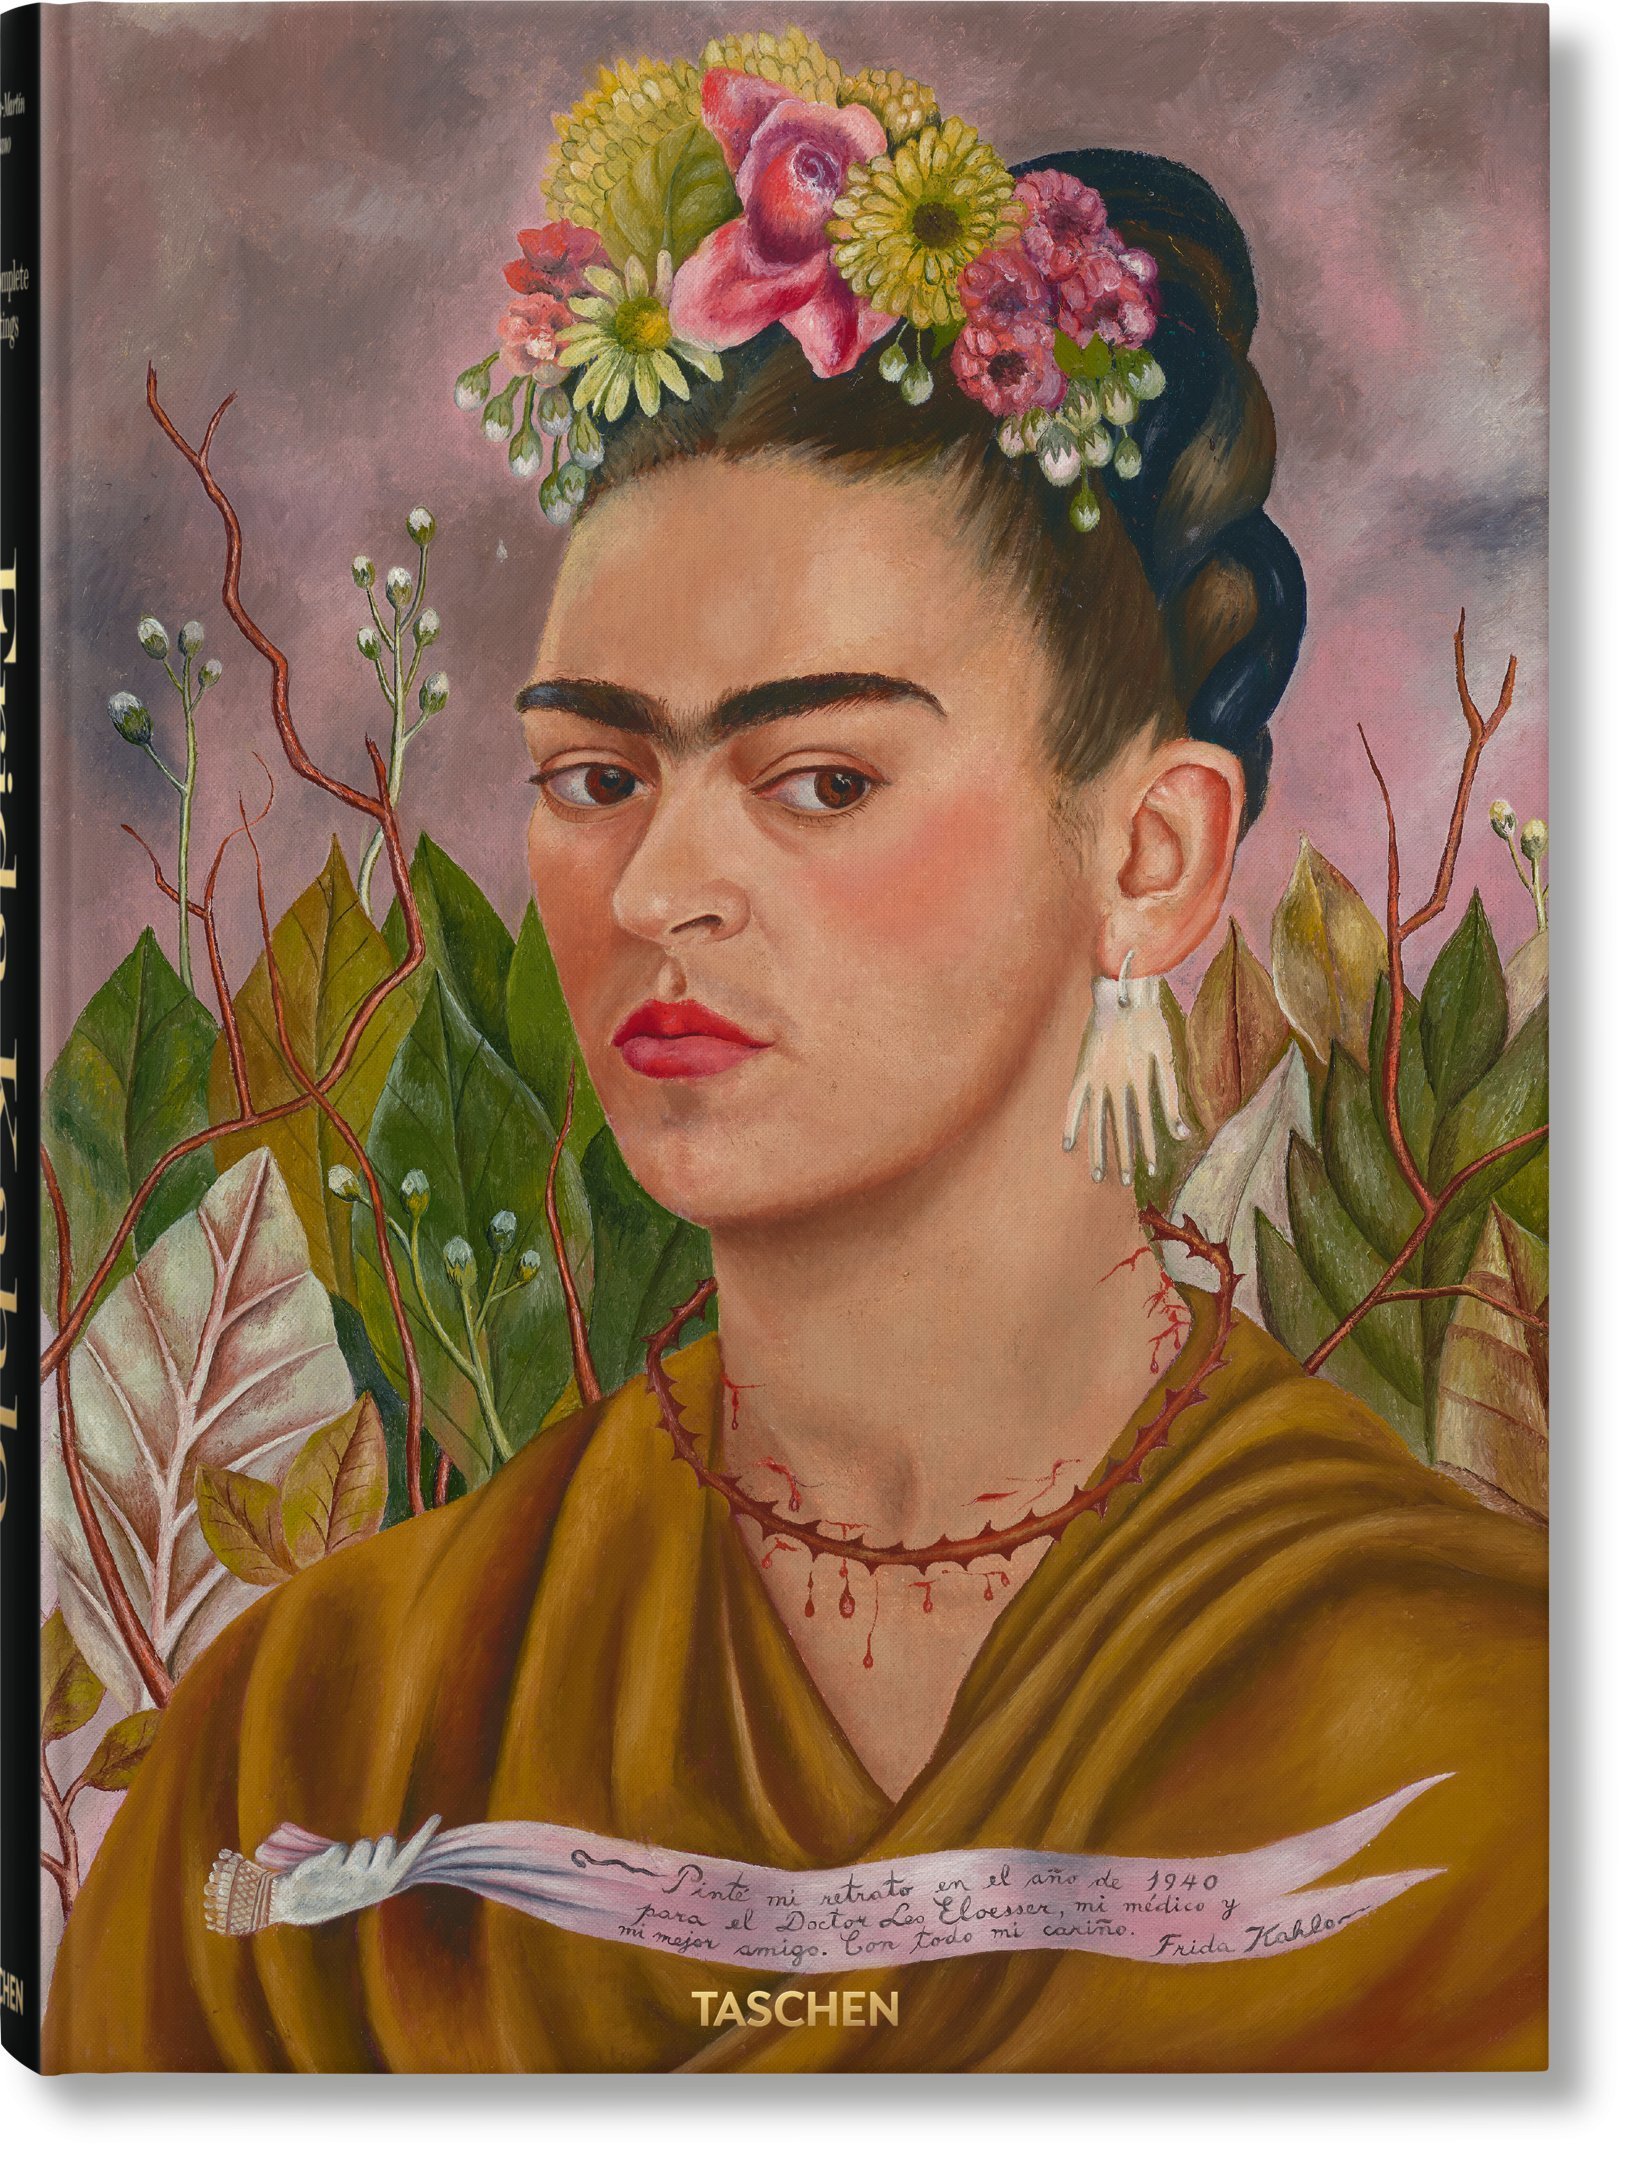 A New Book Gathers Every Single Documented Frida Kahlo Painting